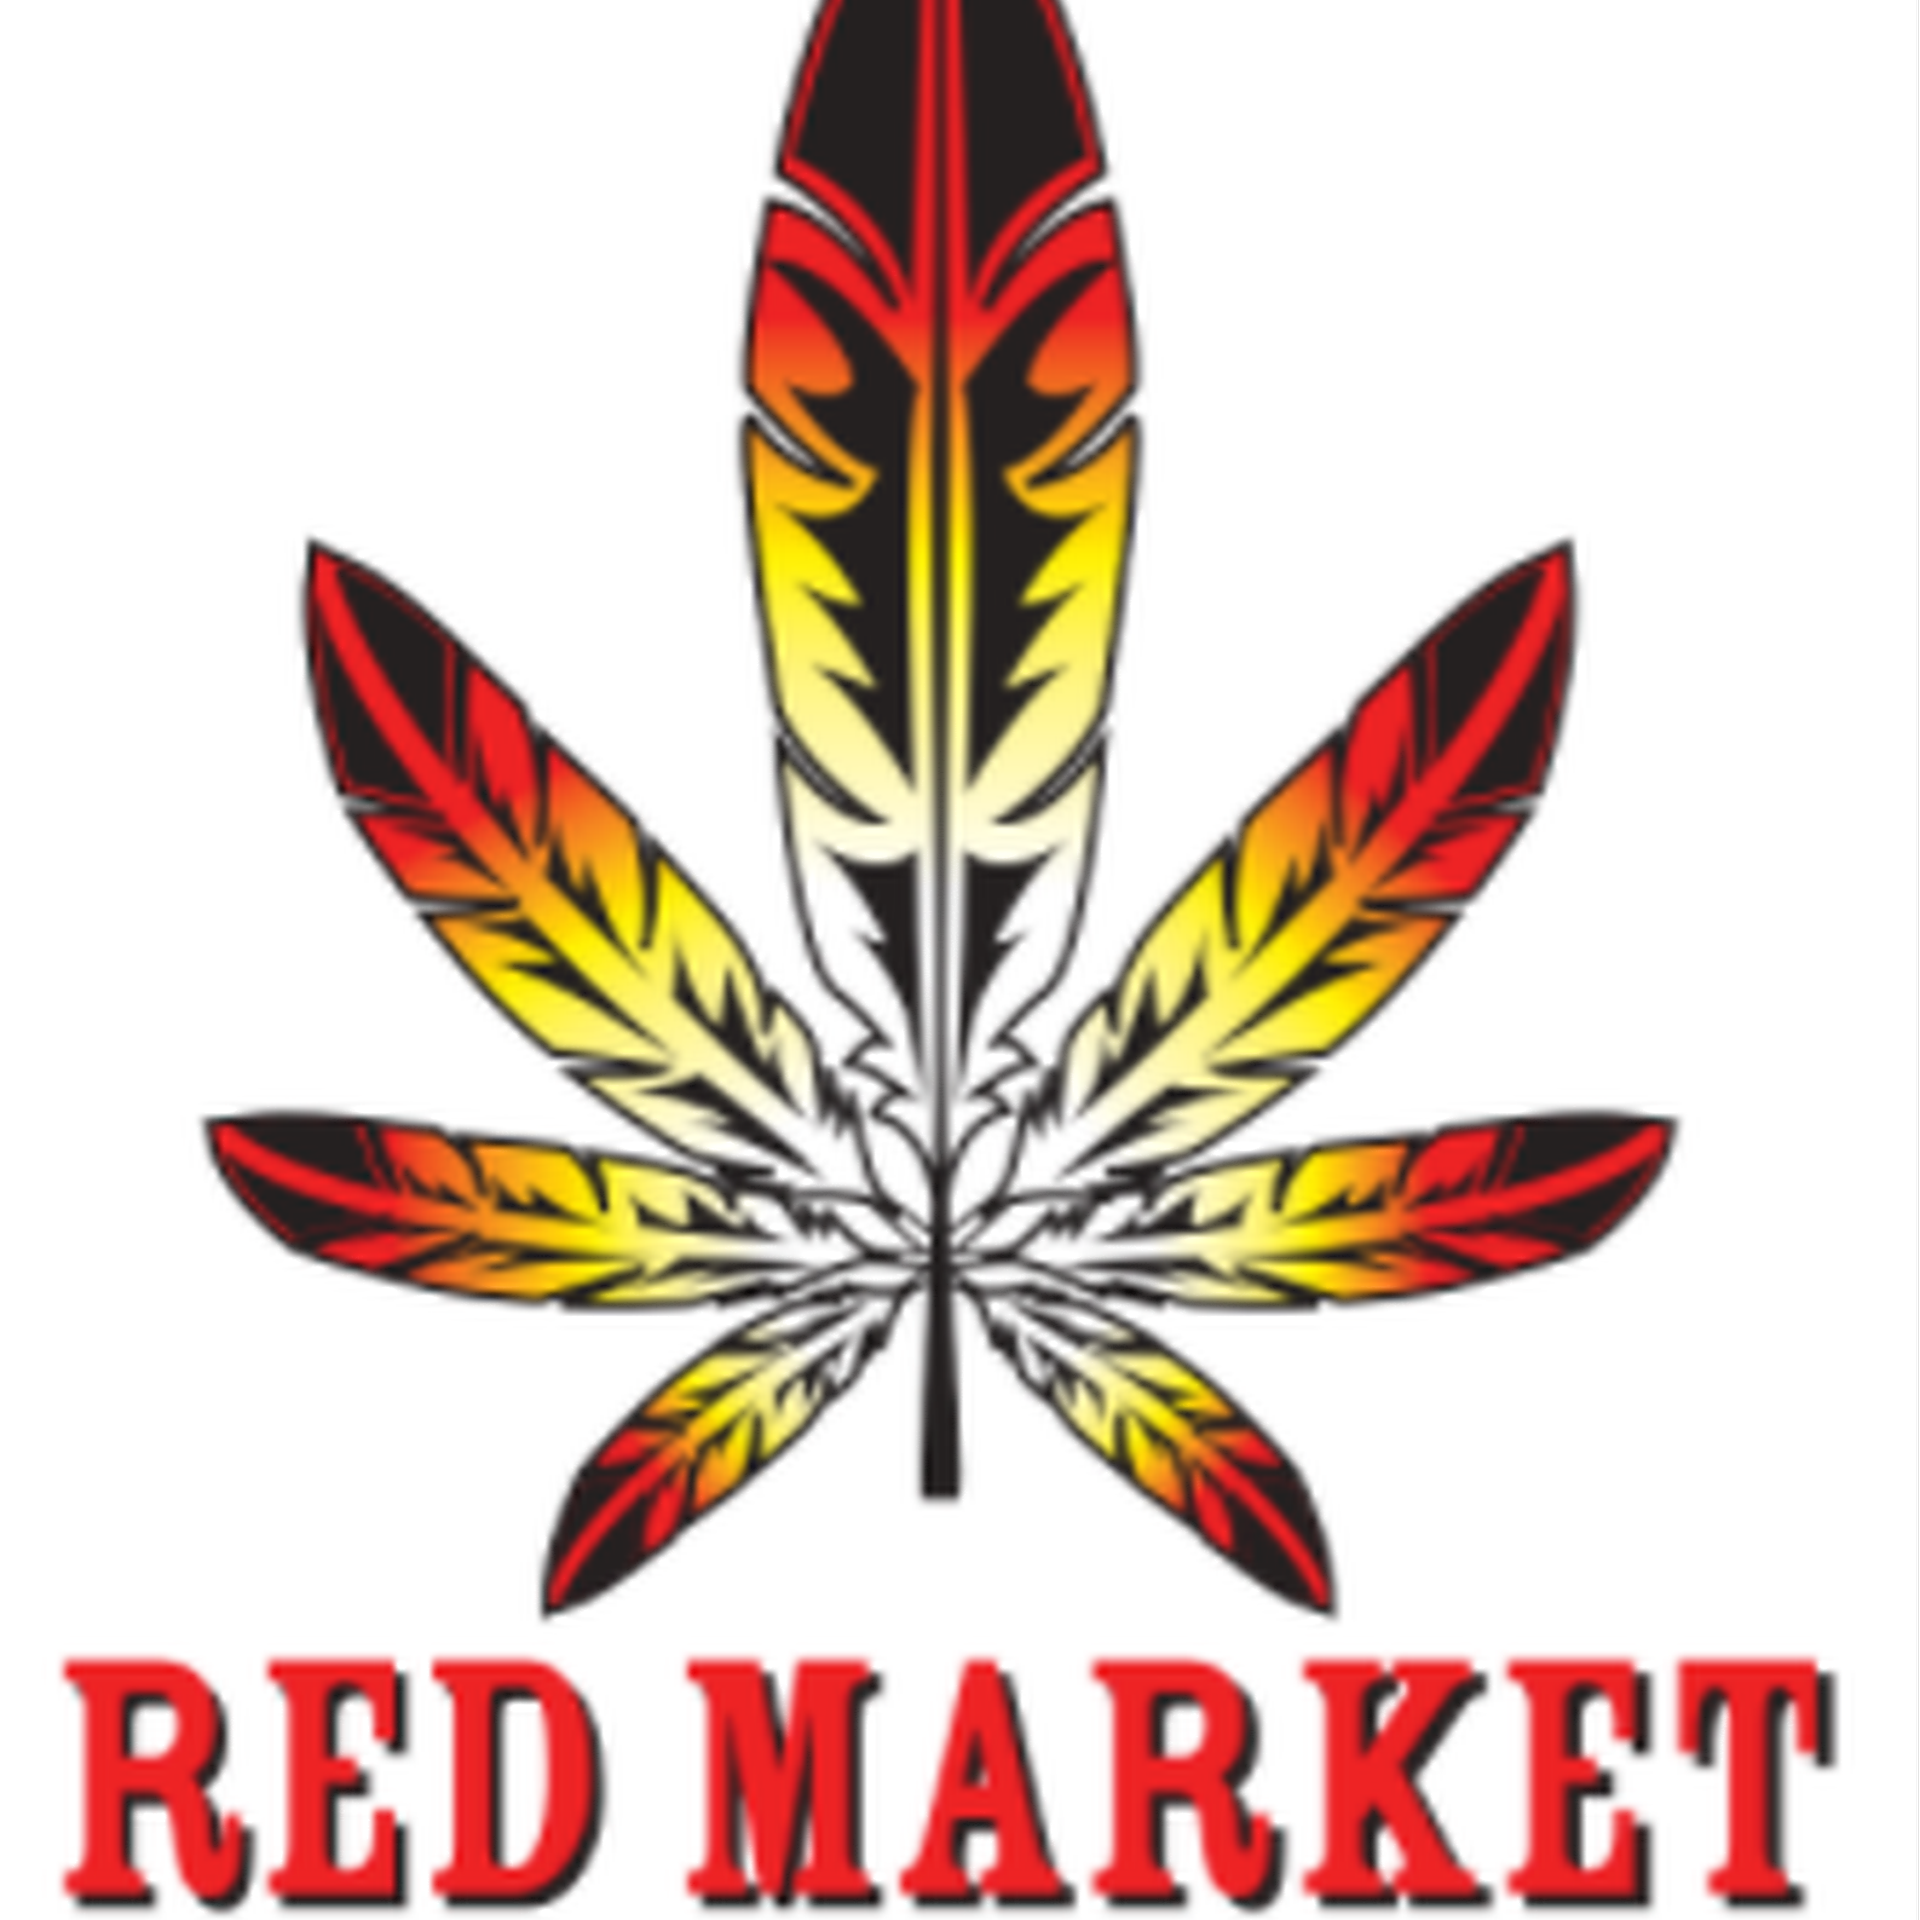 Cannabis Store Redmarket Trading Co - 1